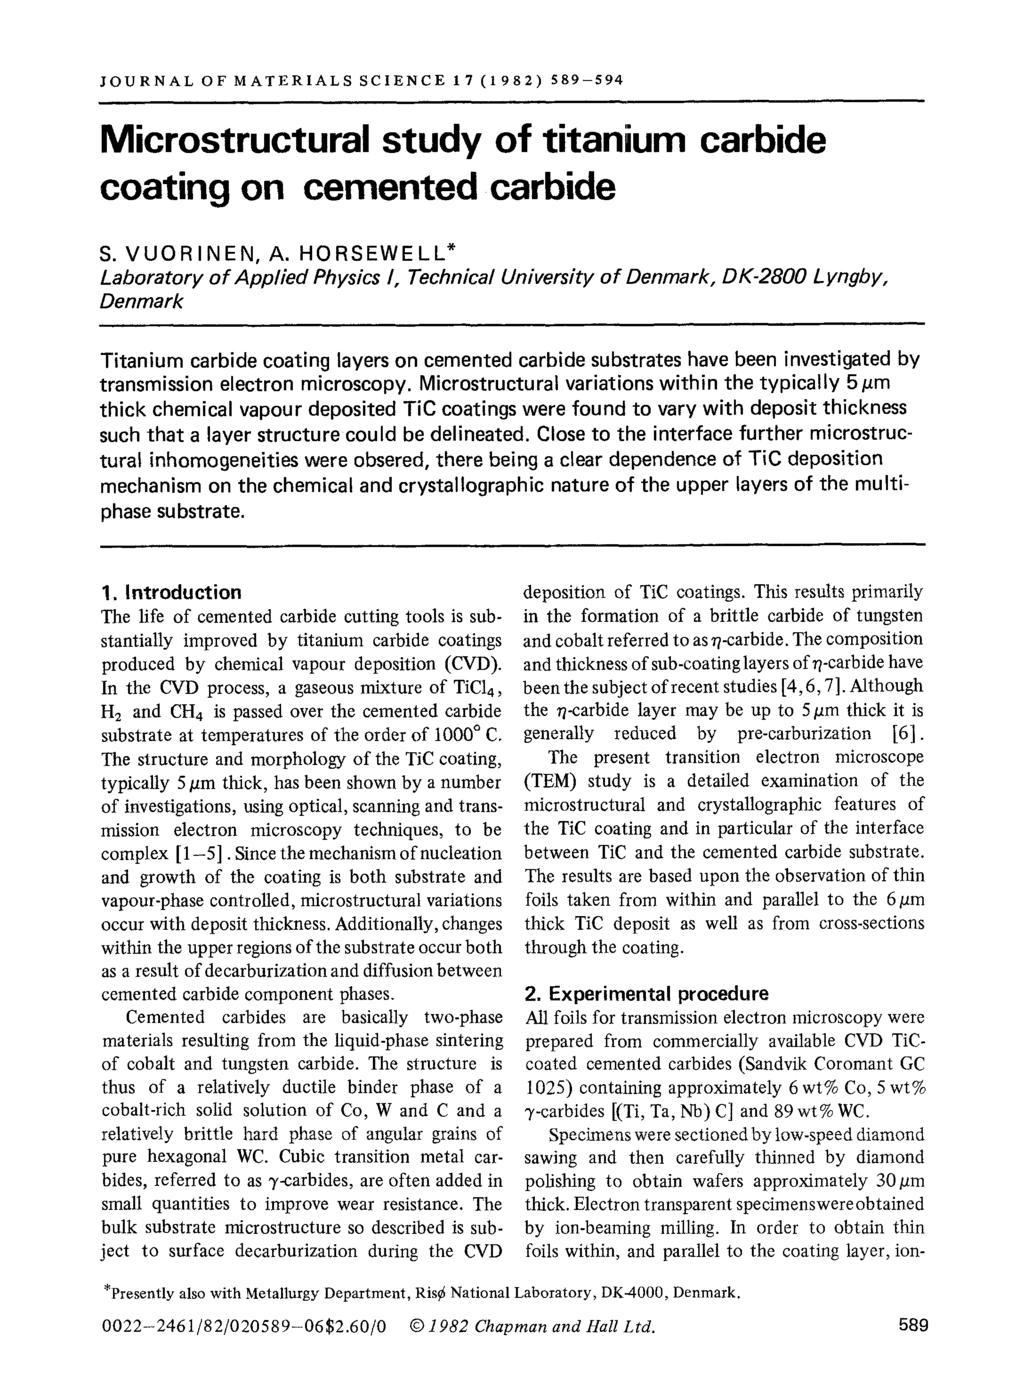 JOURNAL OF MATERIALS SCIENCE 17 (1982) 589-594 Microstructural study of titanium carbide coating on cemented carbide S. VUORINEN, A.